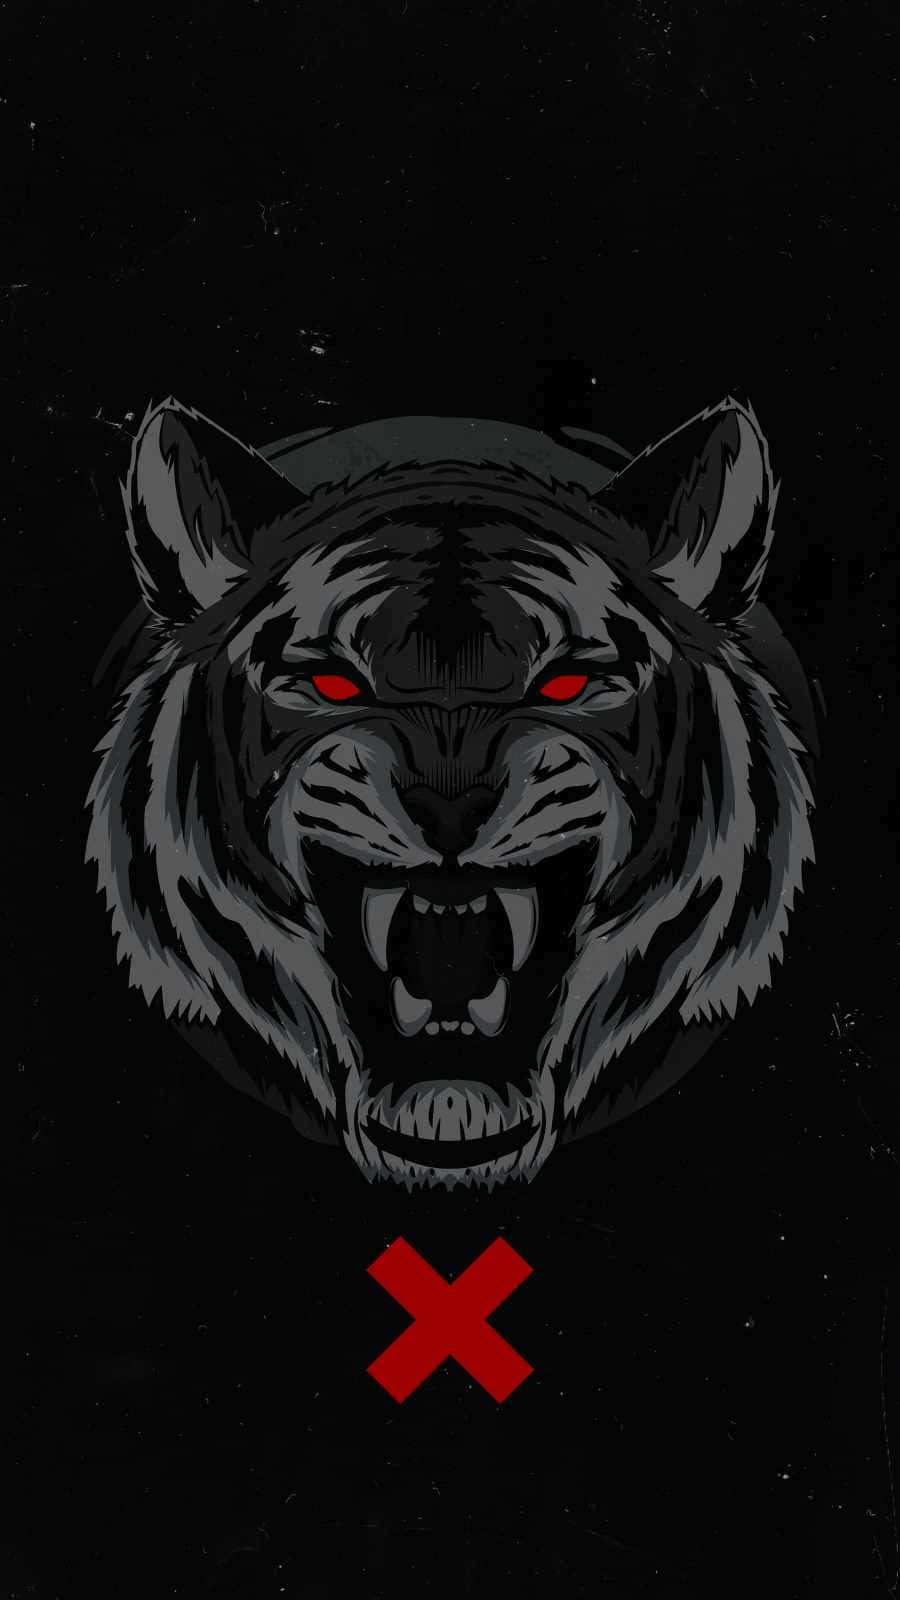 Tiger Face With X Wallpaper